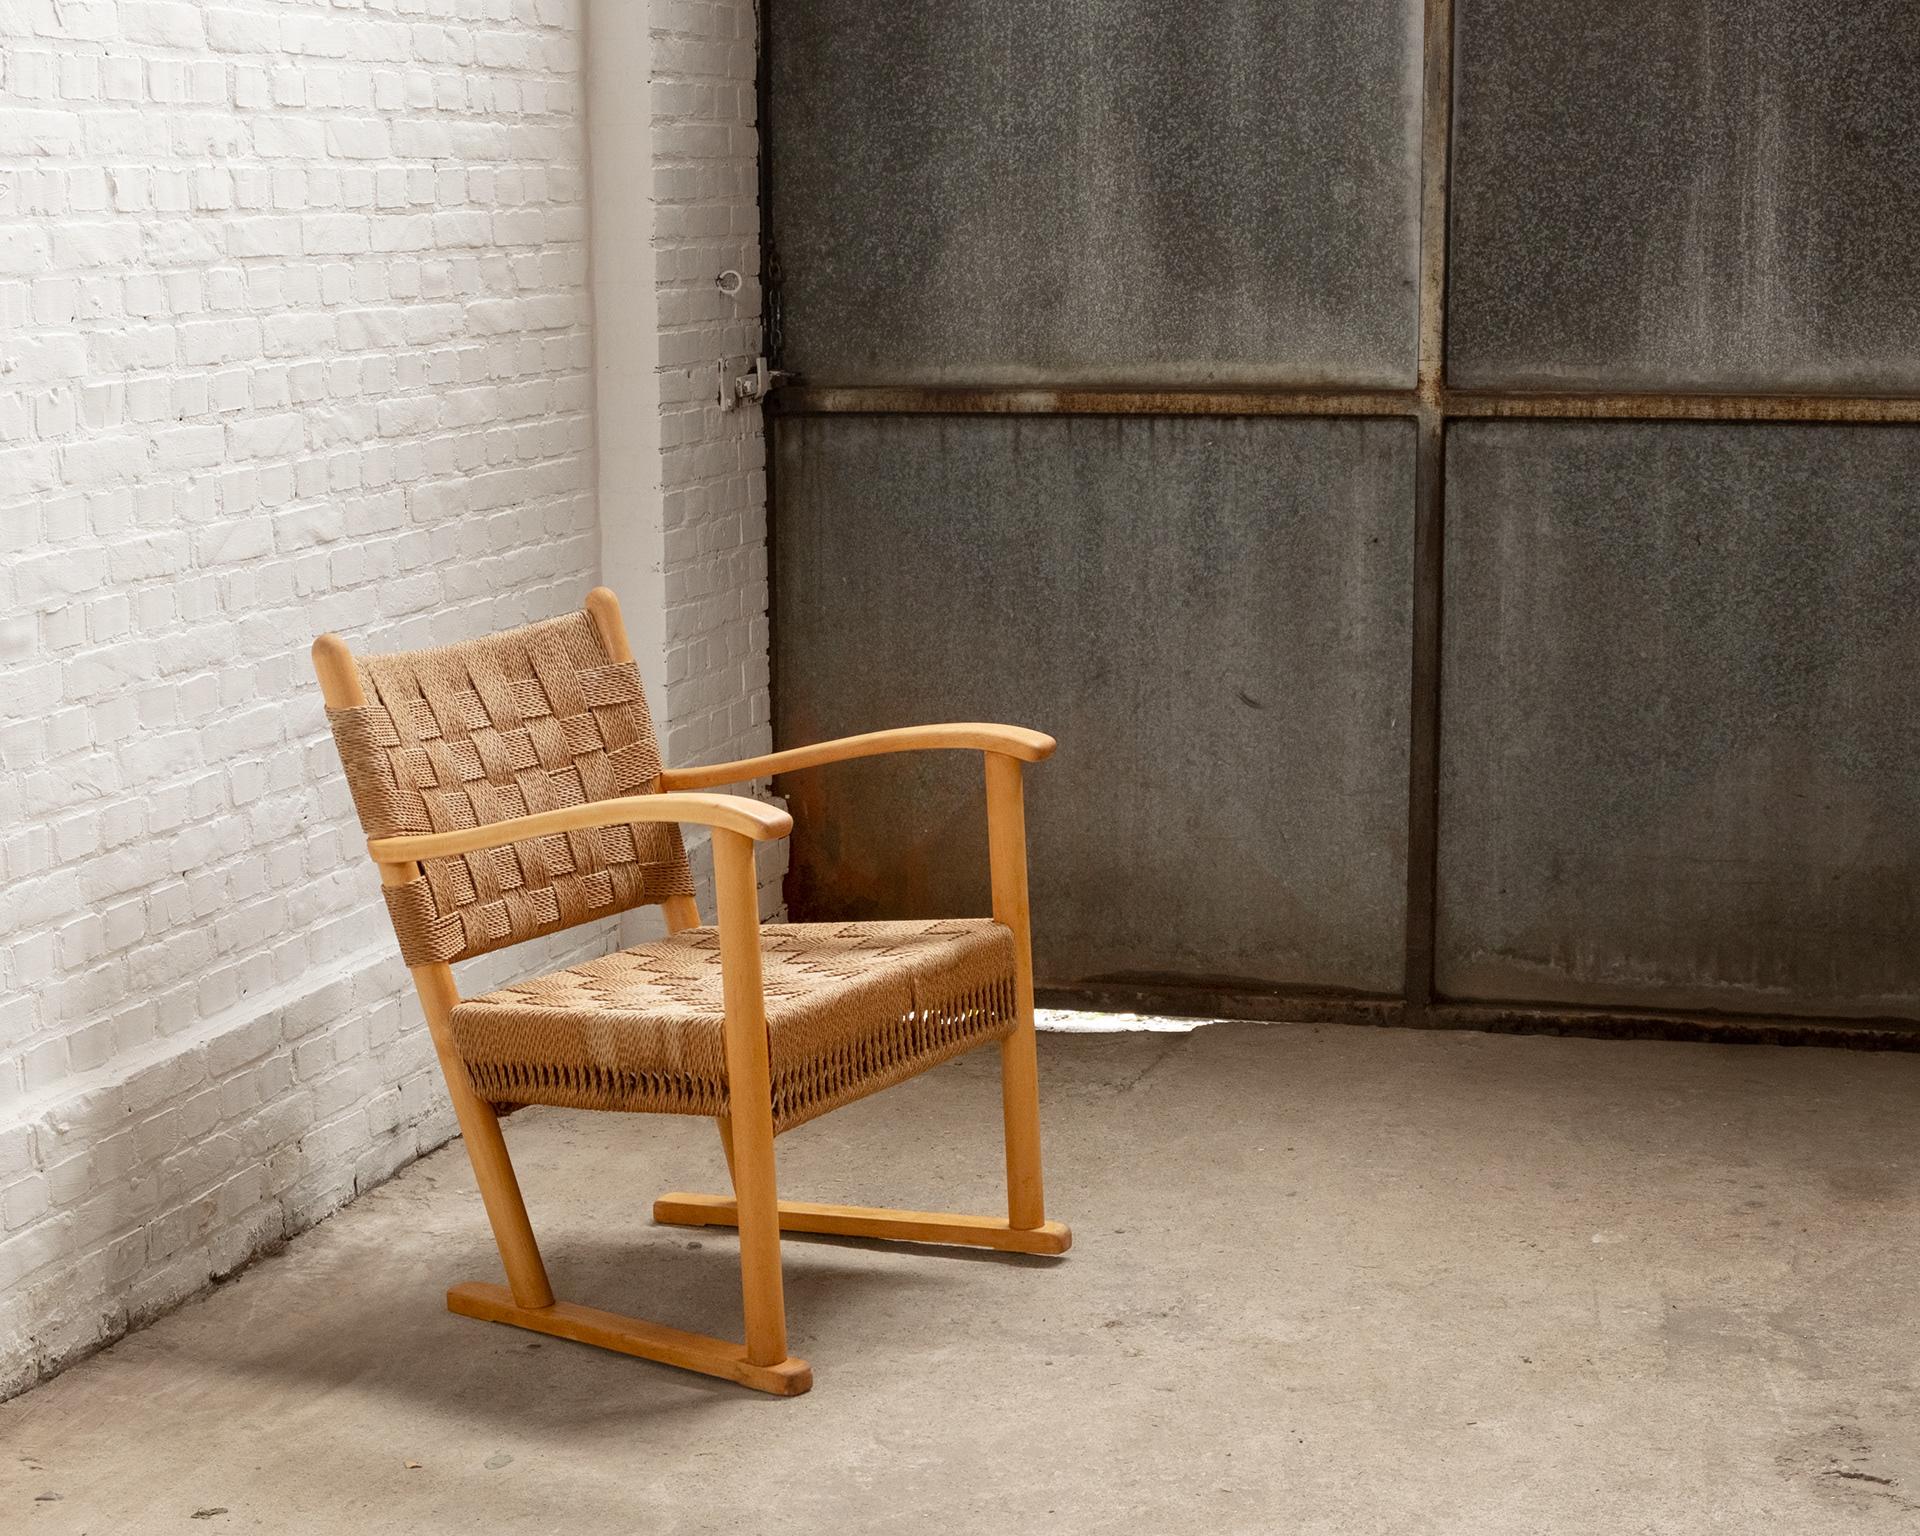 Important and rare lounge Chair Model 1641 designed by Karl Schrøder, produced by Fritz Hansen in the 1940s. Beech and woven seagrass.
The seagrass is original, has some small defects and discoloration but still sturdy and fully functional. The wood